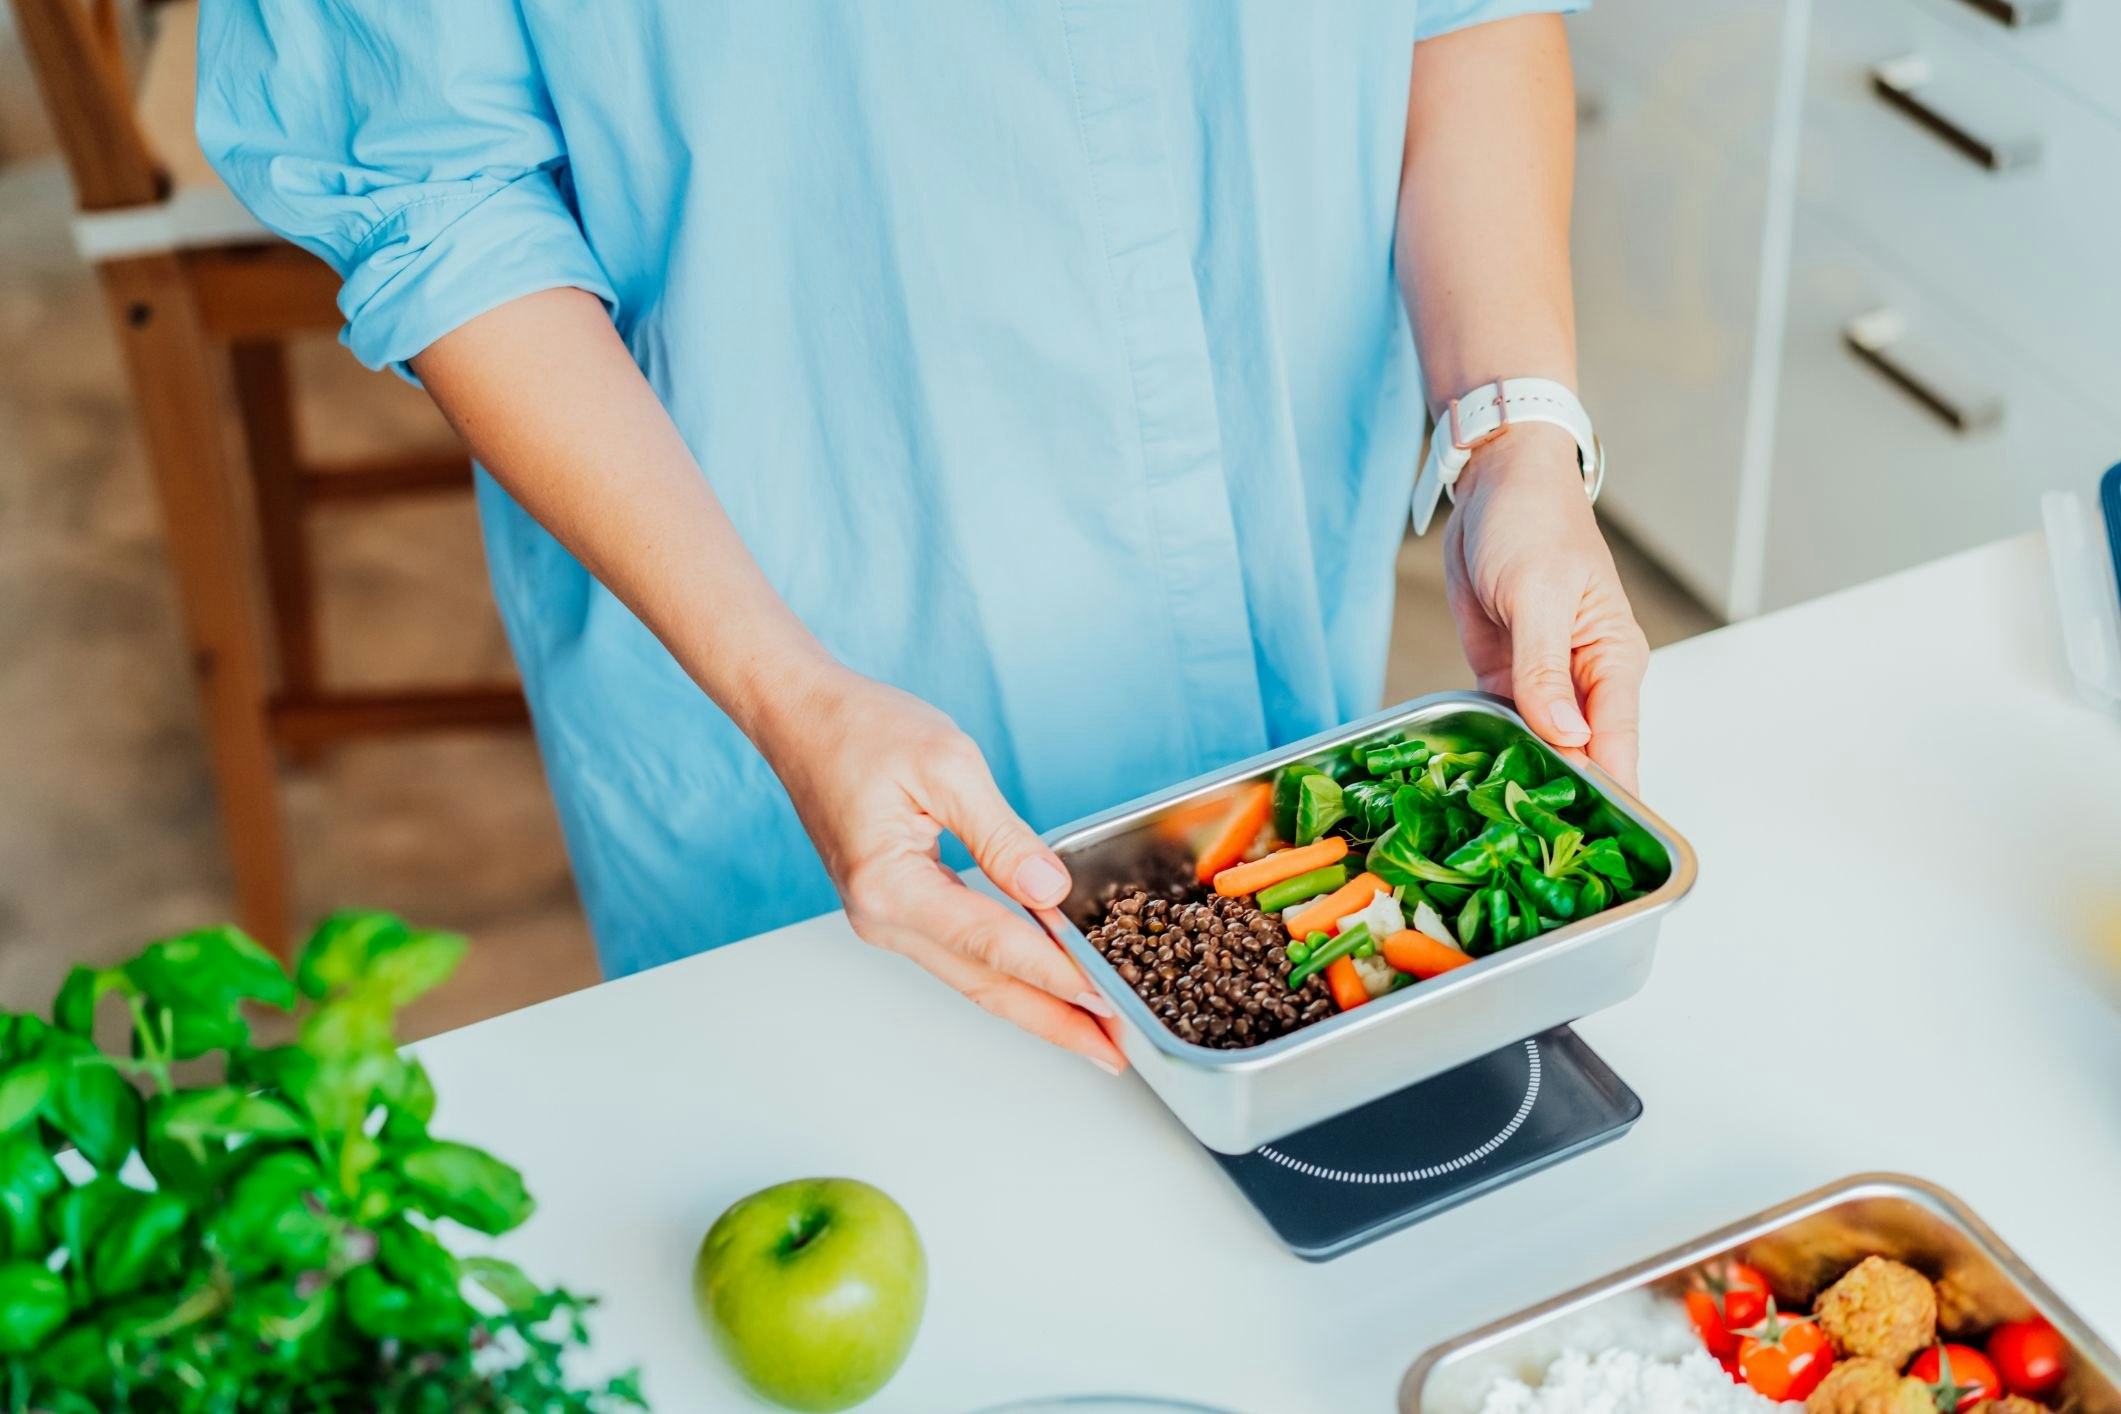 <p>Meal prepping can seem overwhelming when you’re struggling with mental health issues, but there are techniques to navigate this. [Source: Shutterstock]</p>
